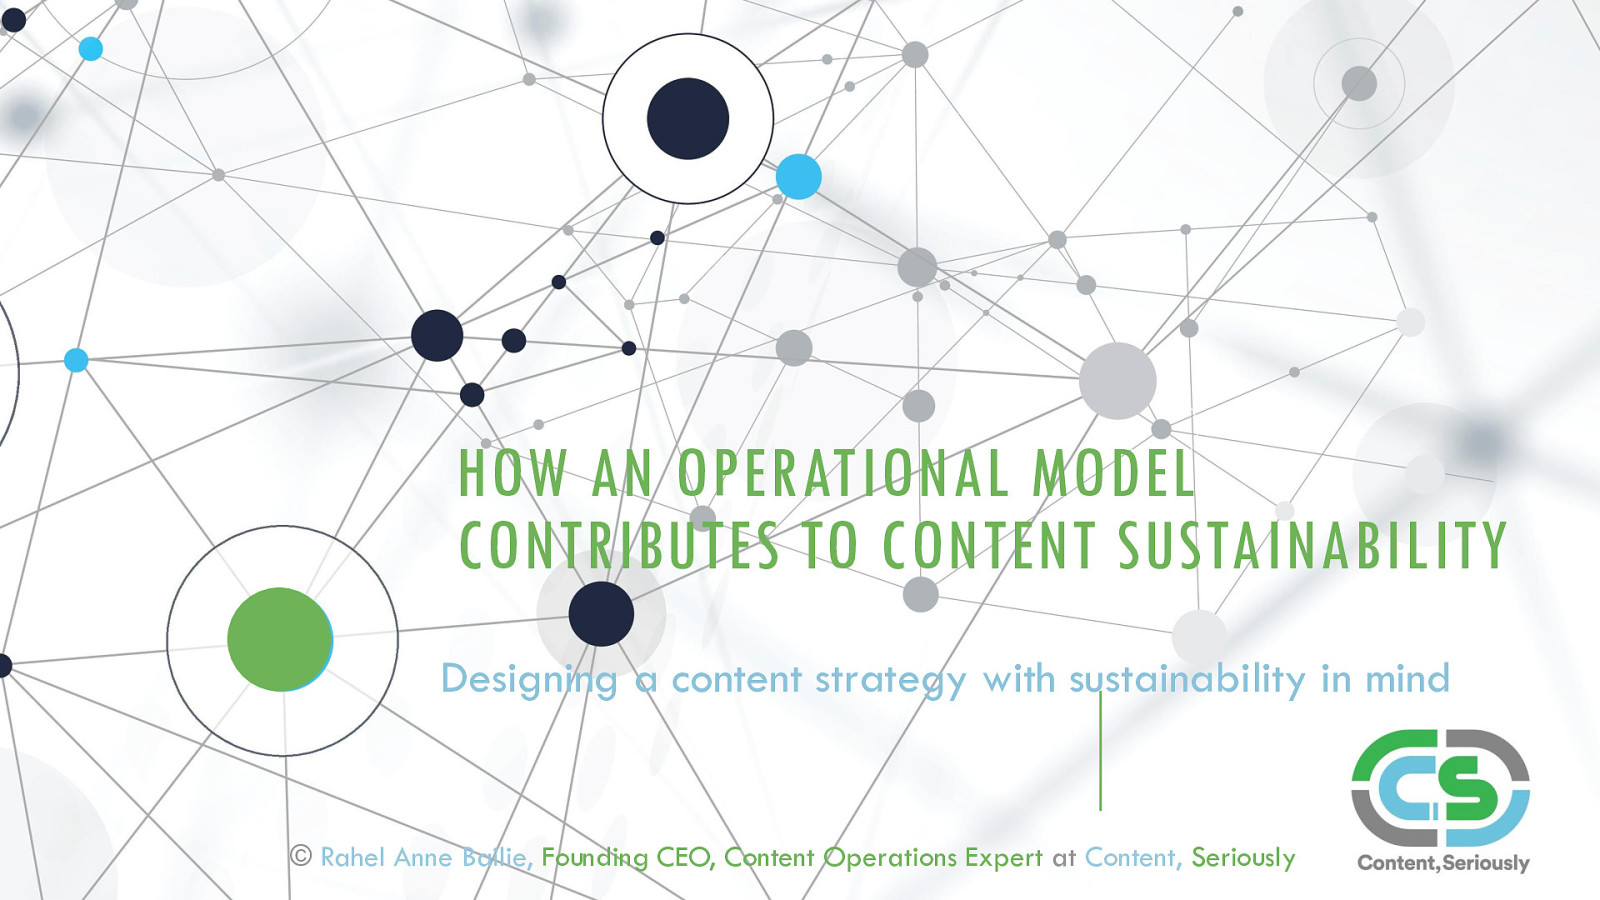 HOW AN OPERATIONAL MODEL CONTRIBUTES TO CONTENT SUSTAINABILITY